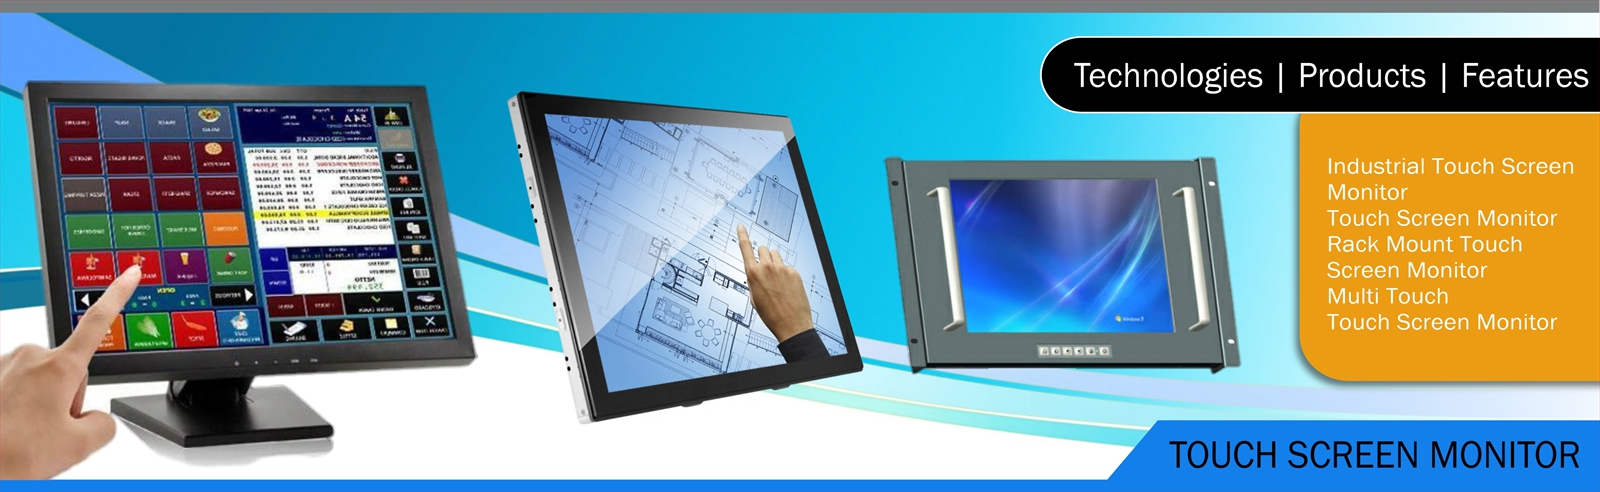 Elpro Technologies Touch Screen Monitor